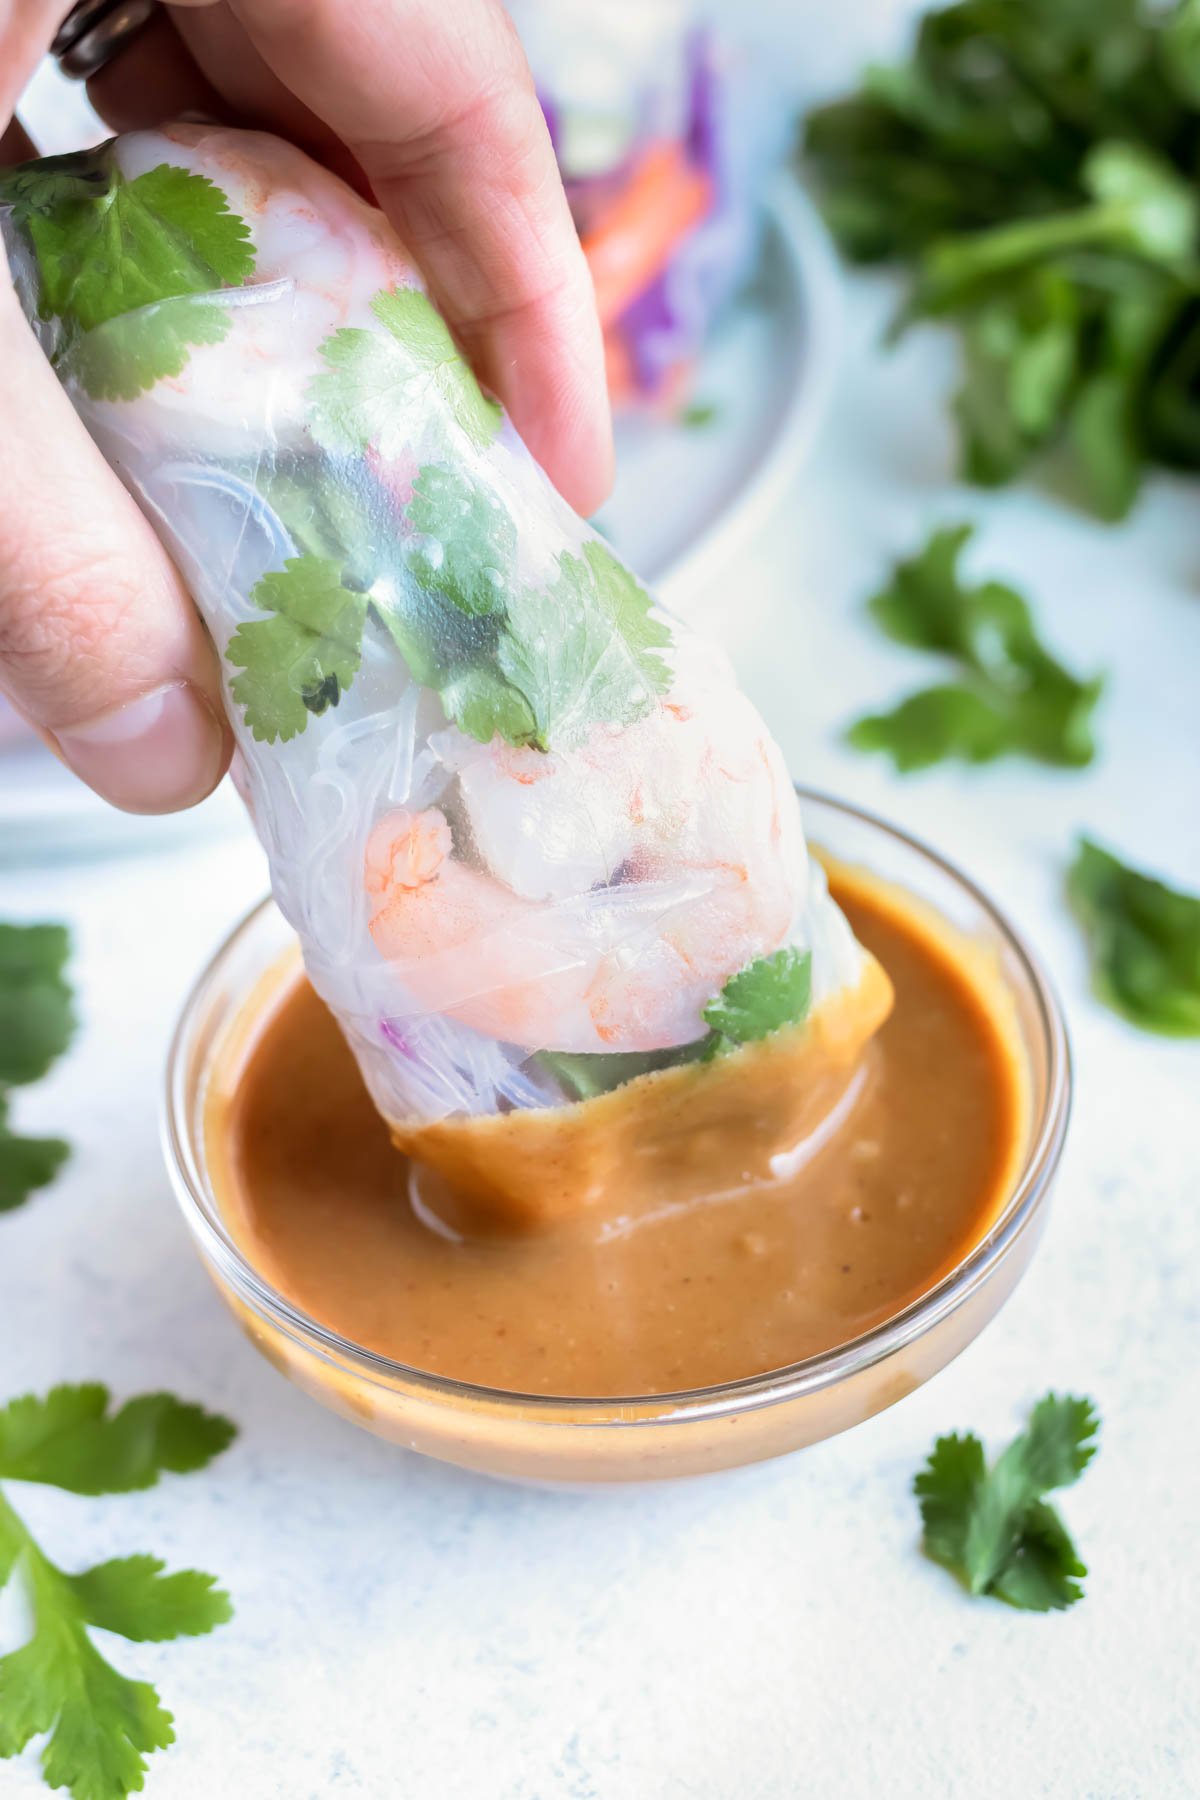 A spring roll is dipped into a homemade peanut sauce.